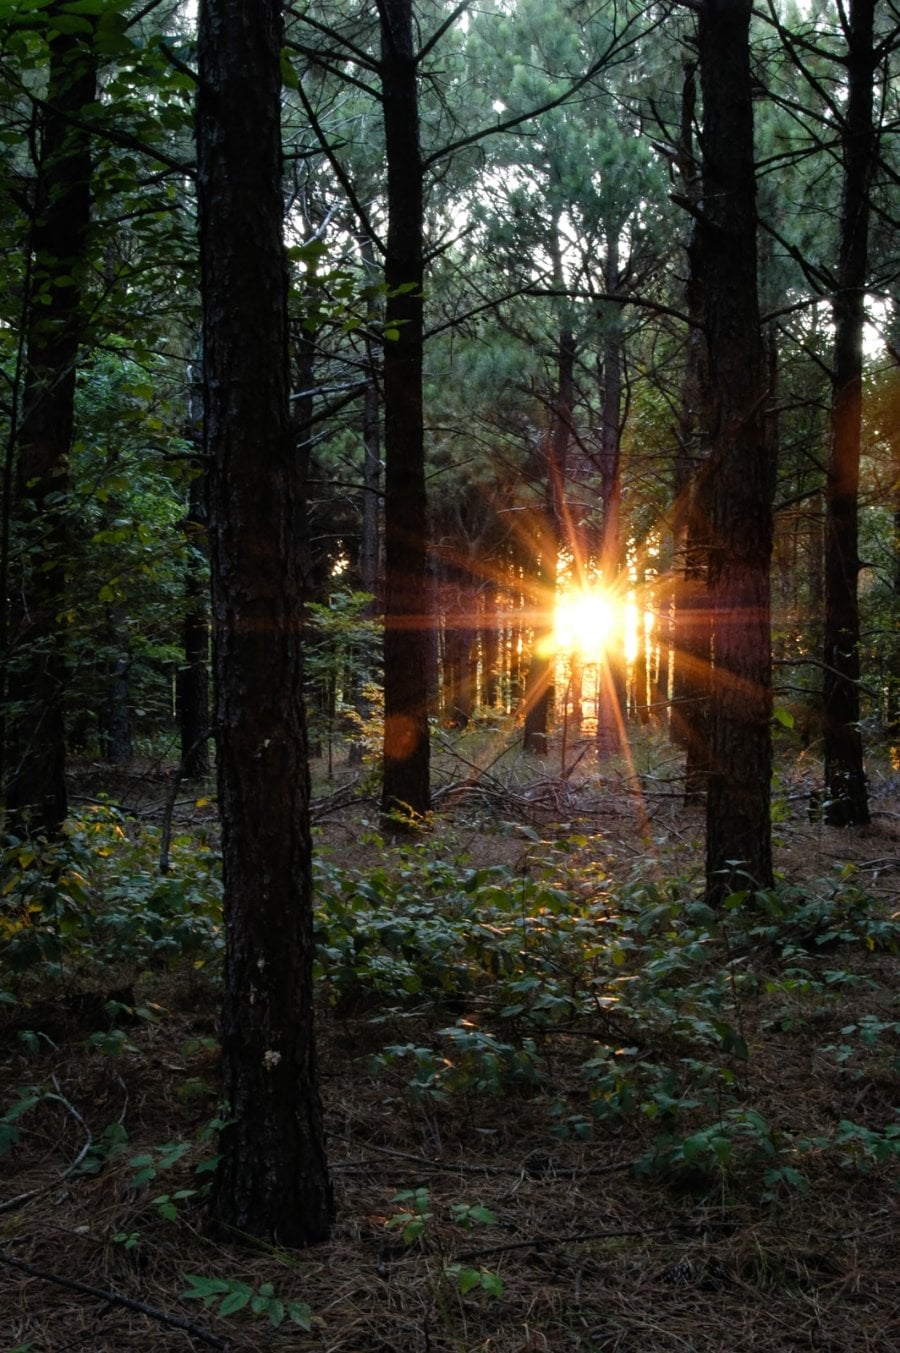 Rays of sunlight peering through a pine forest